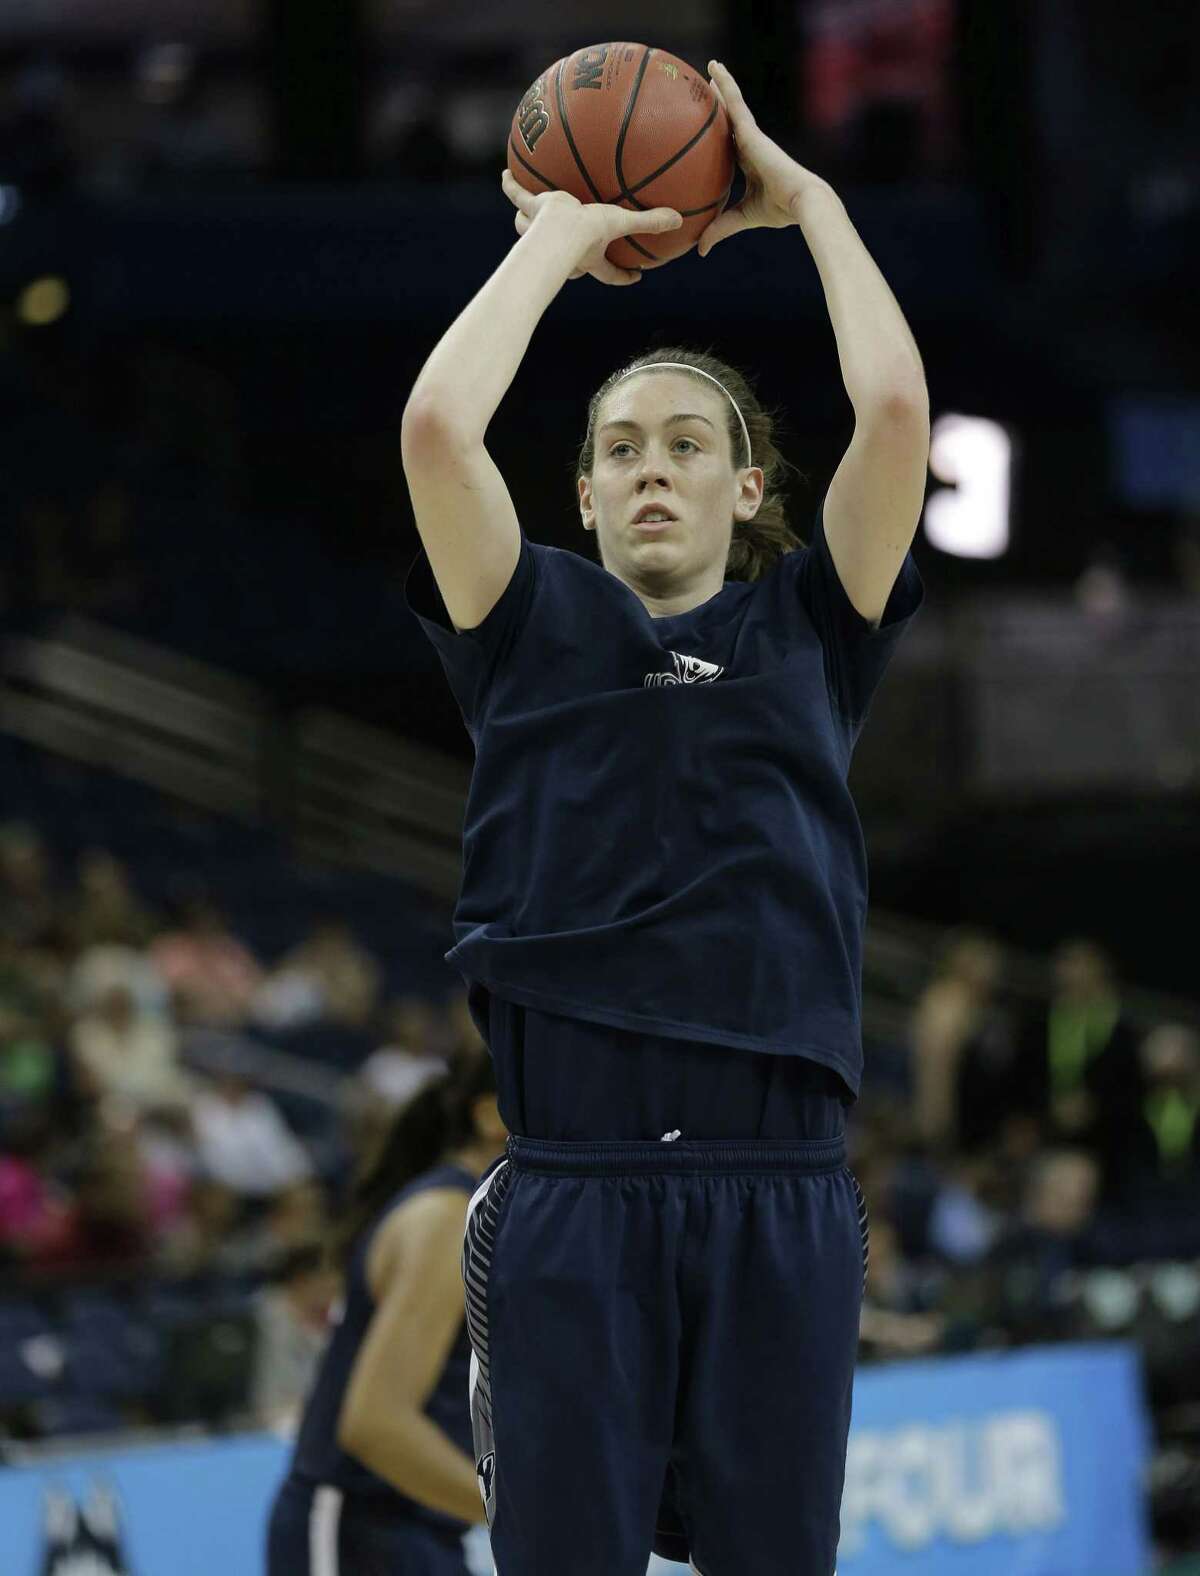 Connecticut forward Breanna Stewart shoots during a Saturday practice session for the NCAA Final Four tournament women’s college basketball semifinal game in Tampa, Fla. Connecticut will play Maryland Sunday in a semifinal game.